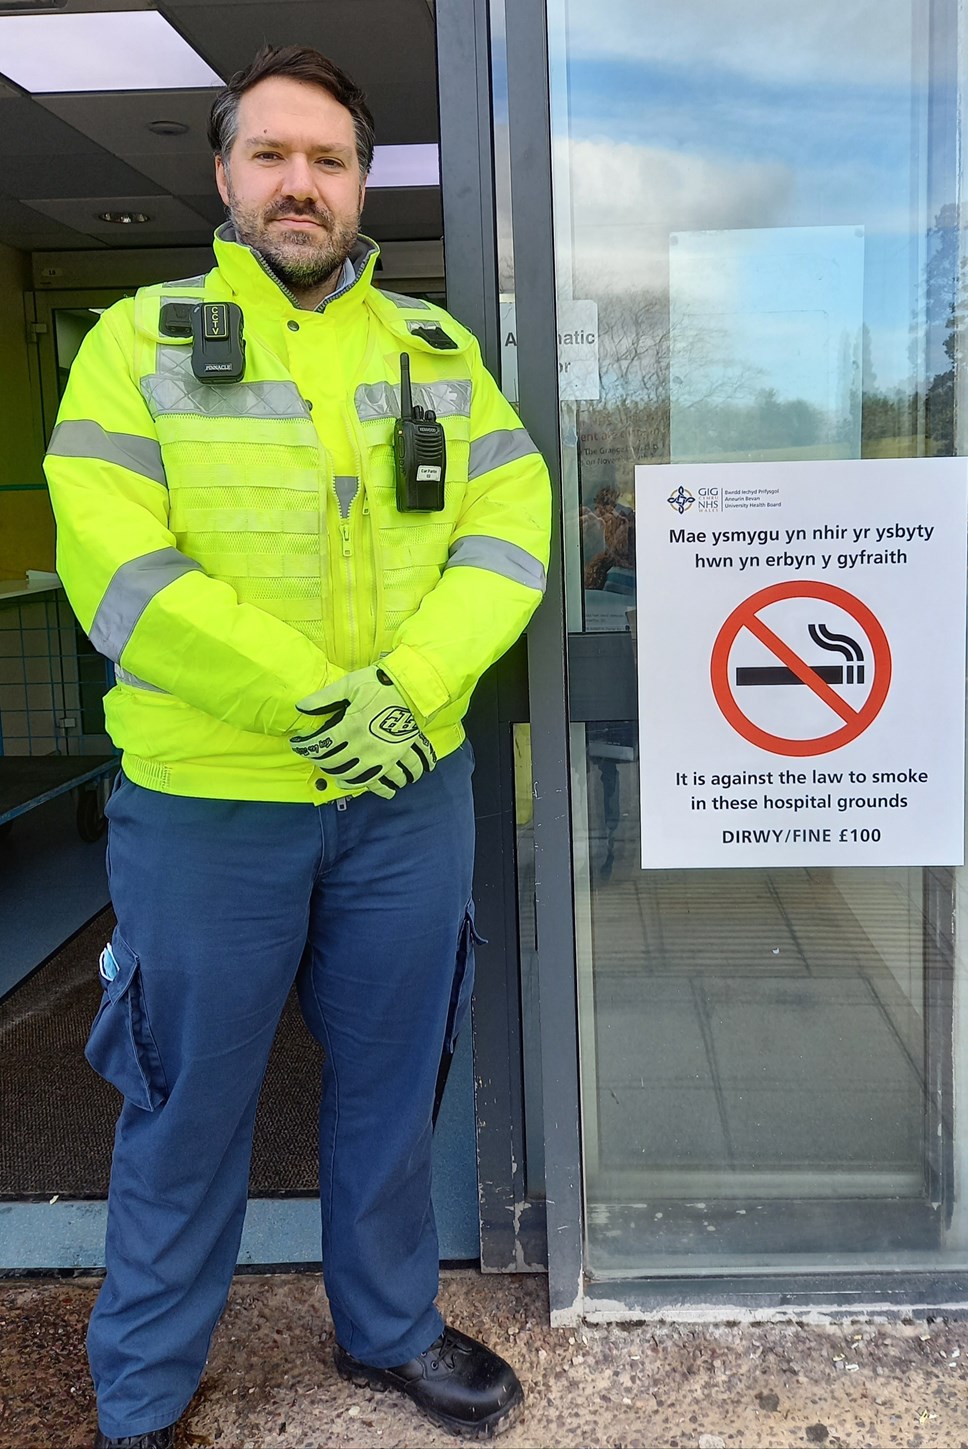 Smoke Free Officer with new signage 2